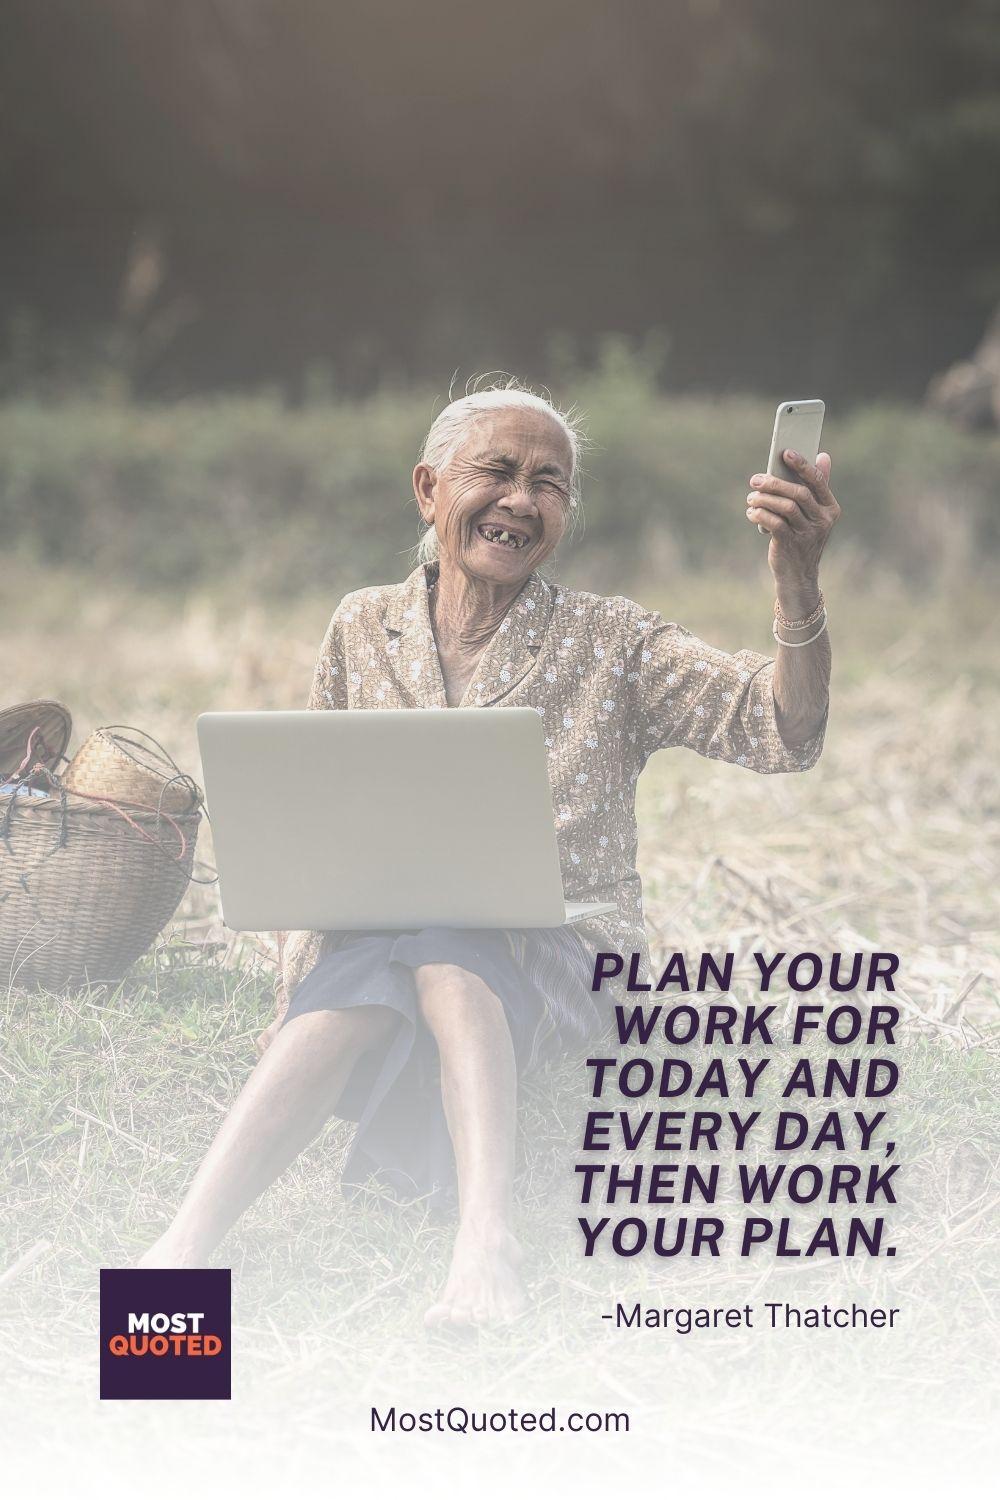 Plan your work for today and every day, then work your plan. - Margaret Thatcher